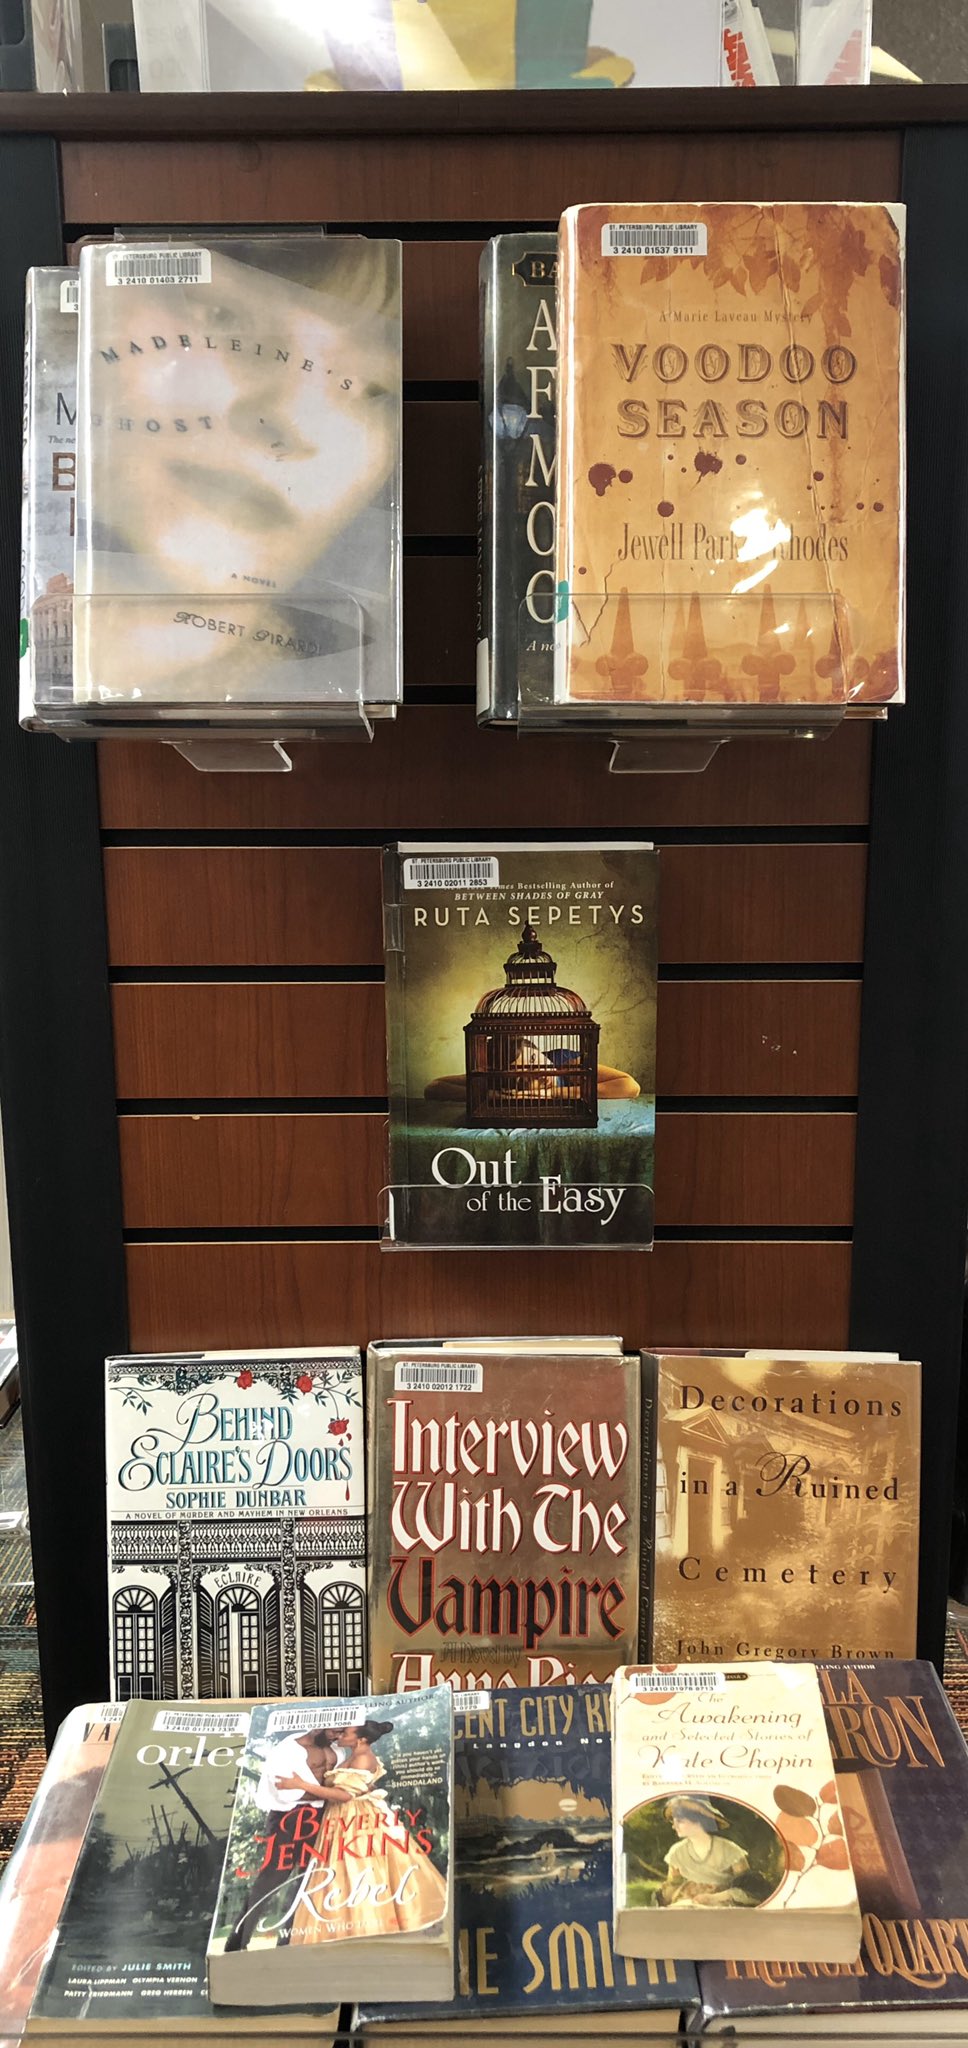 Mardi Gras book display with titles about New Orleans